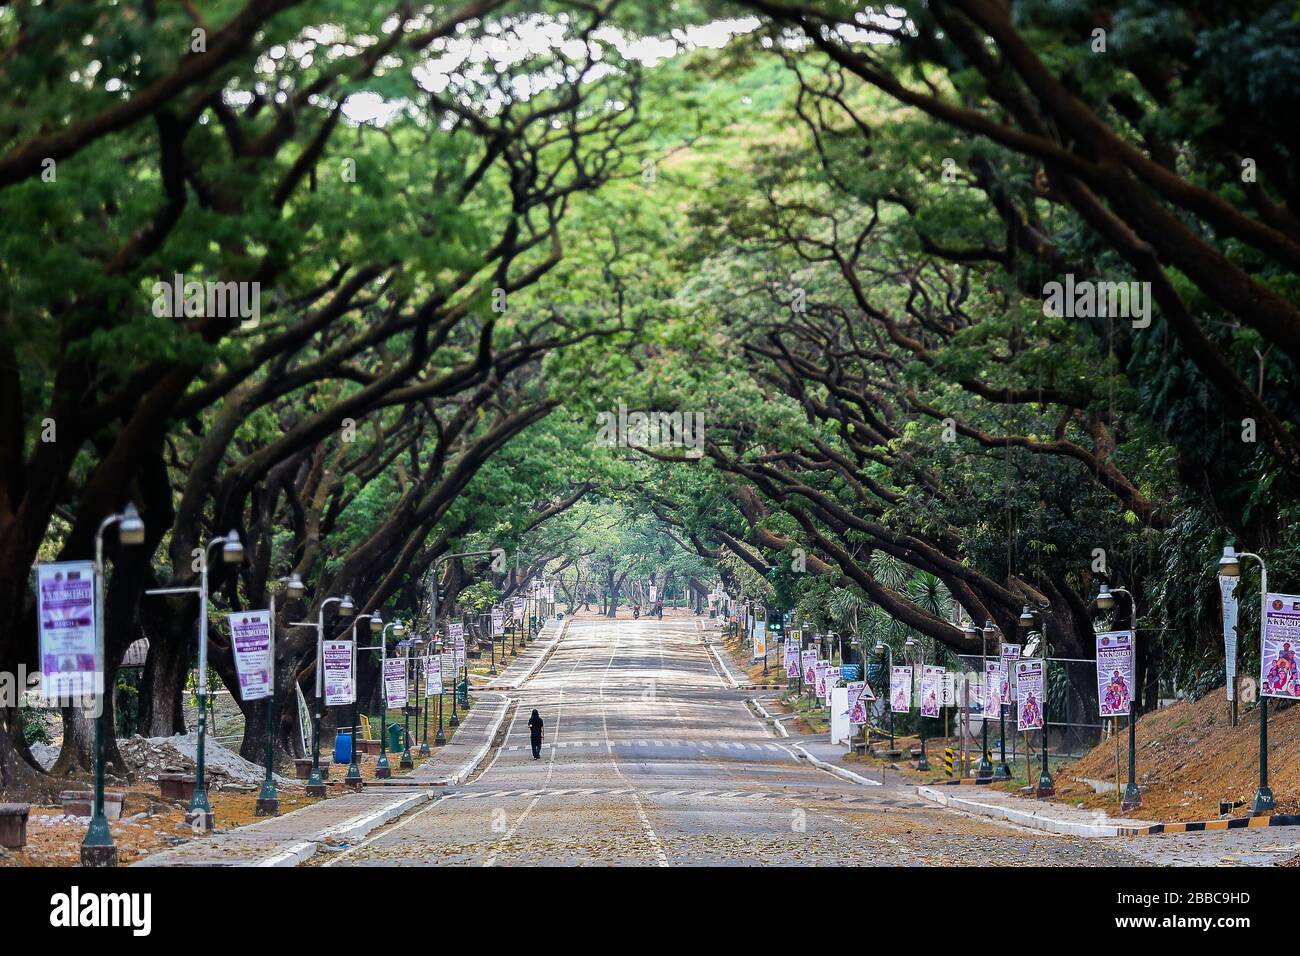 Beijing, China. 30th Mar, 2020. A woman walks along an empty street inside the University of the Philippines in Quezon City, the Philippines on March 30, 2020. Credit: Rouelle Umali/Xinhua/Alamy Live News Stock Photo